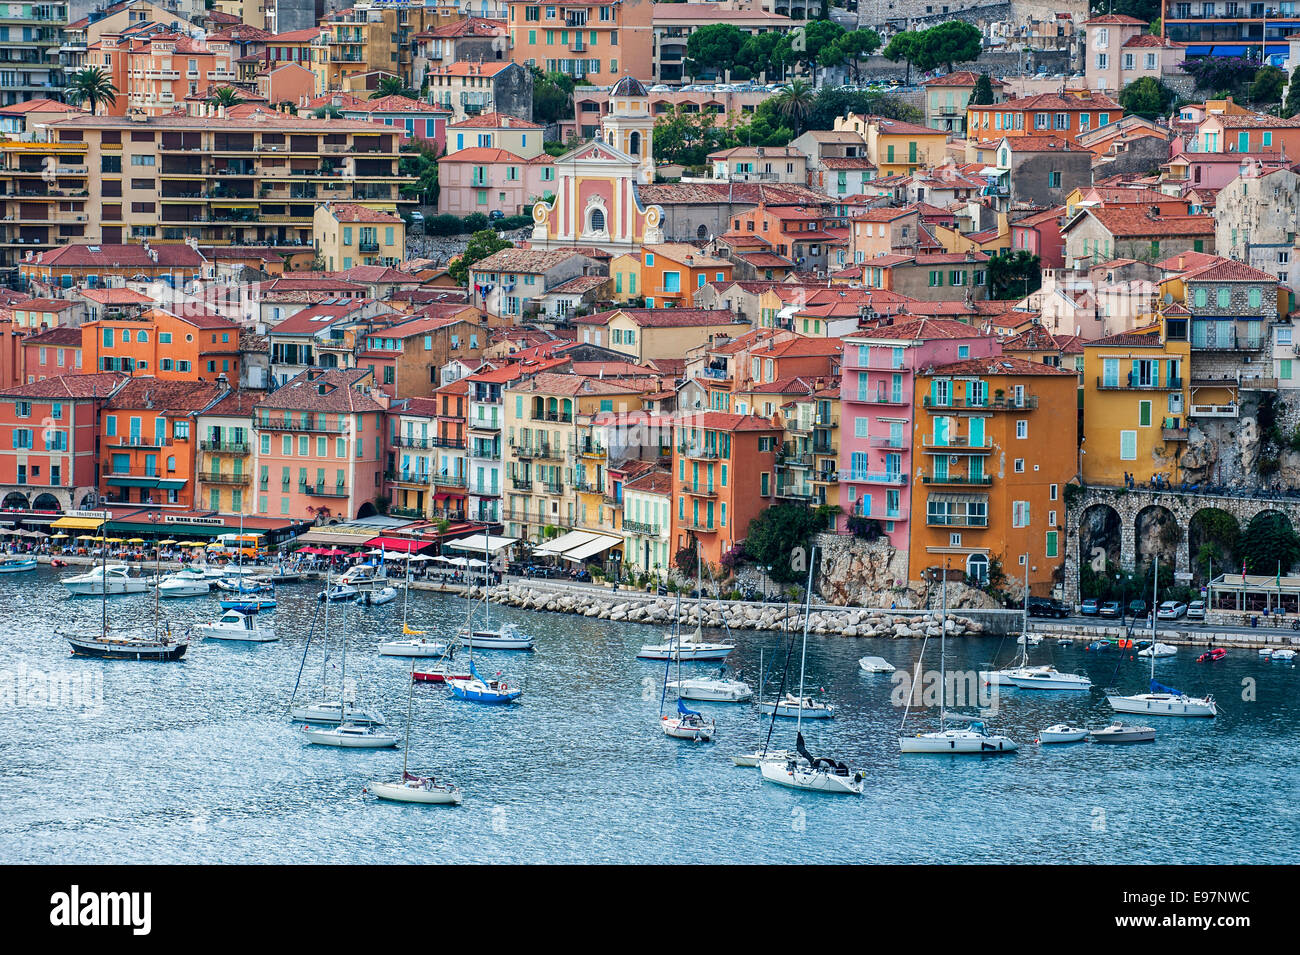 Sailing boats and colourful houses in the city Nice along the French Riviera, Côte d'Azur, Alpes-Maritimes, France Stock Photo